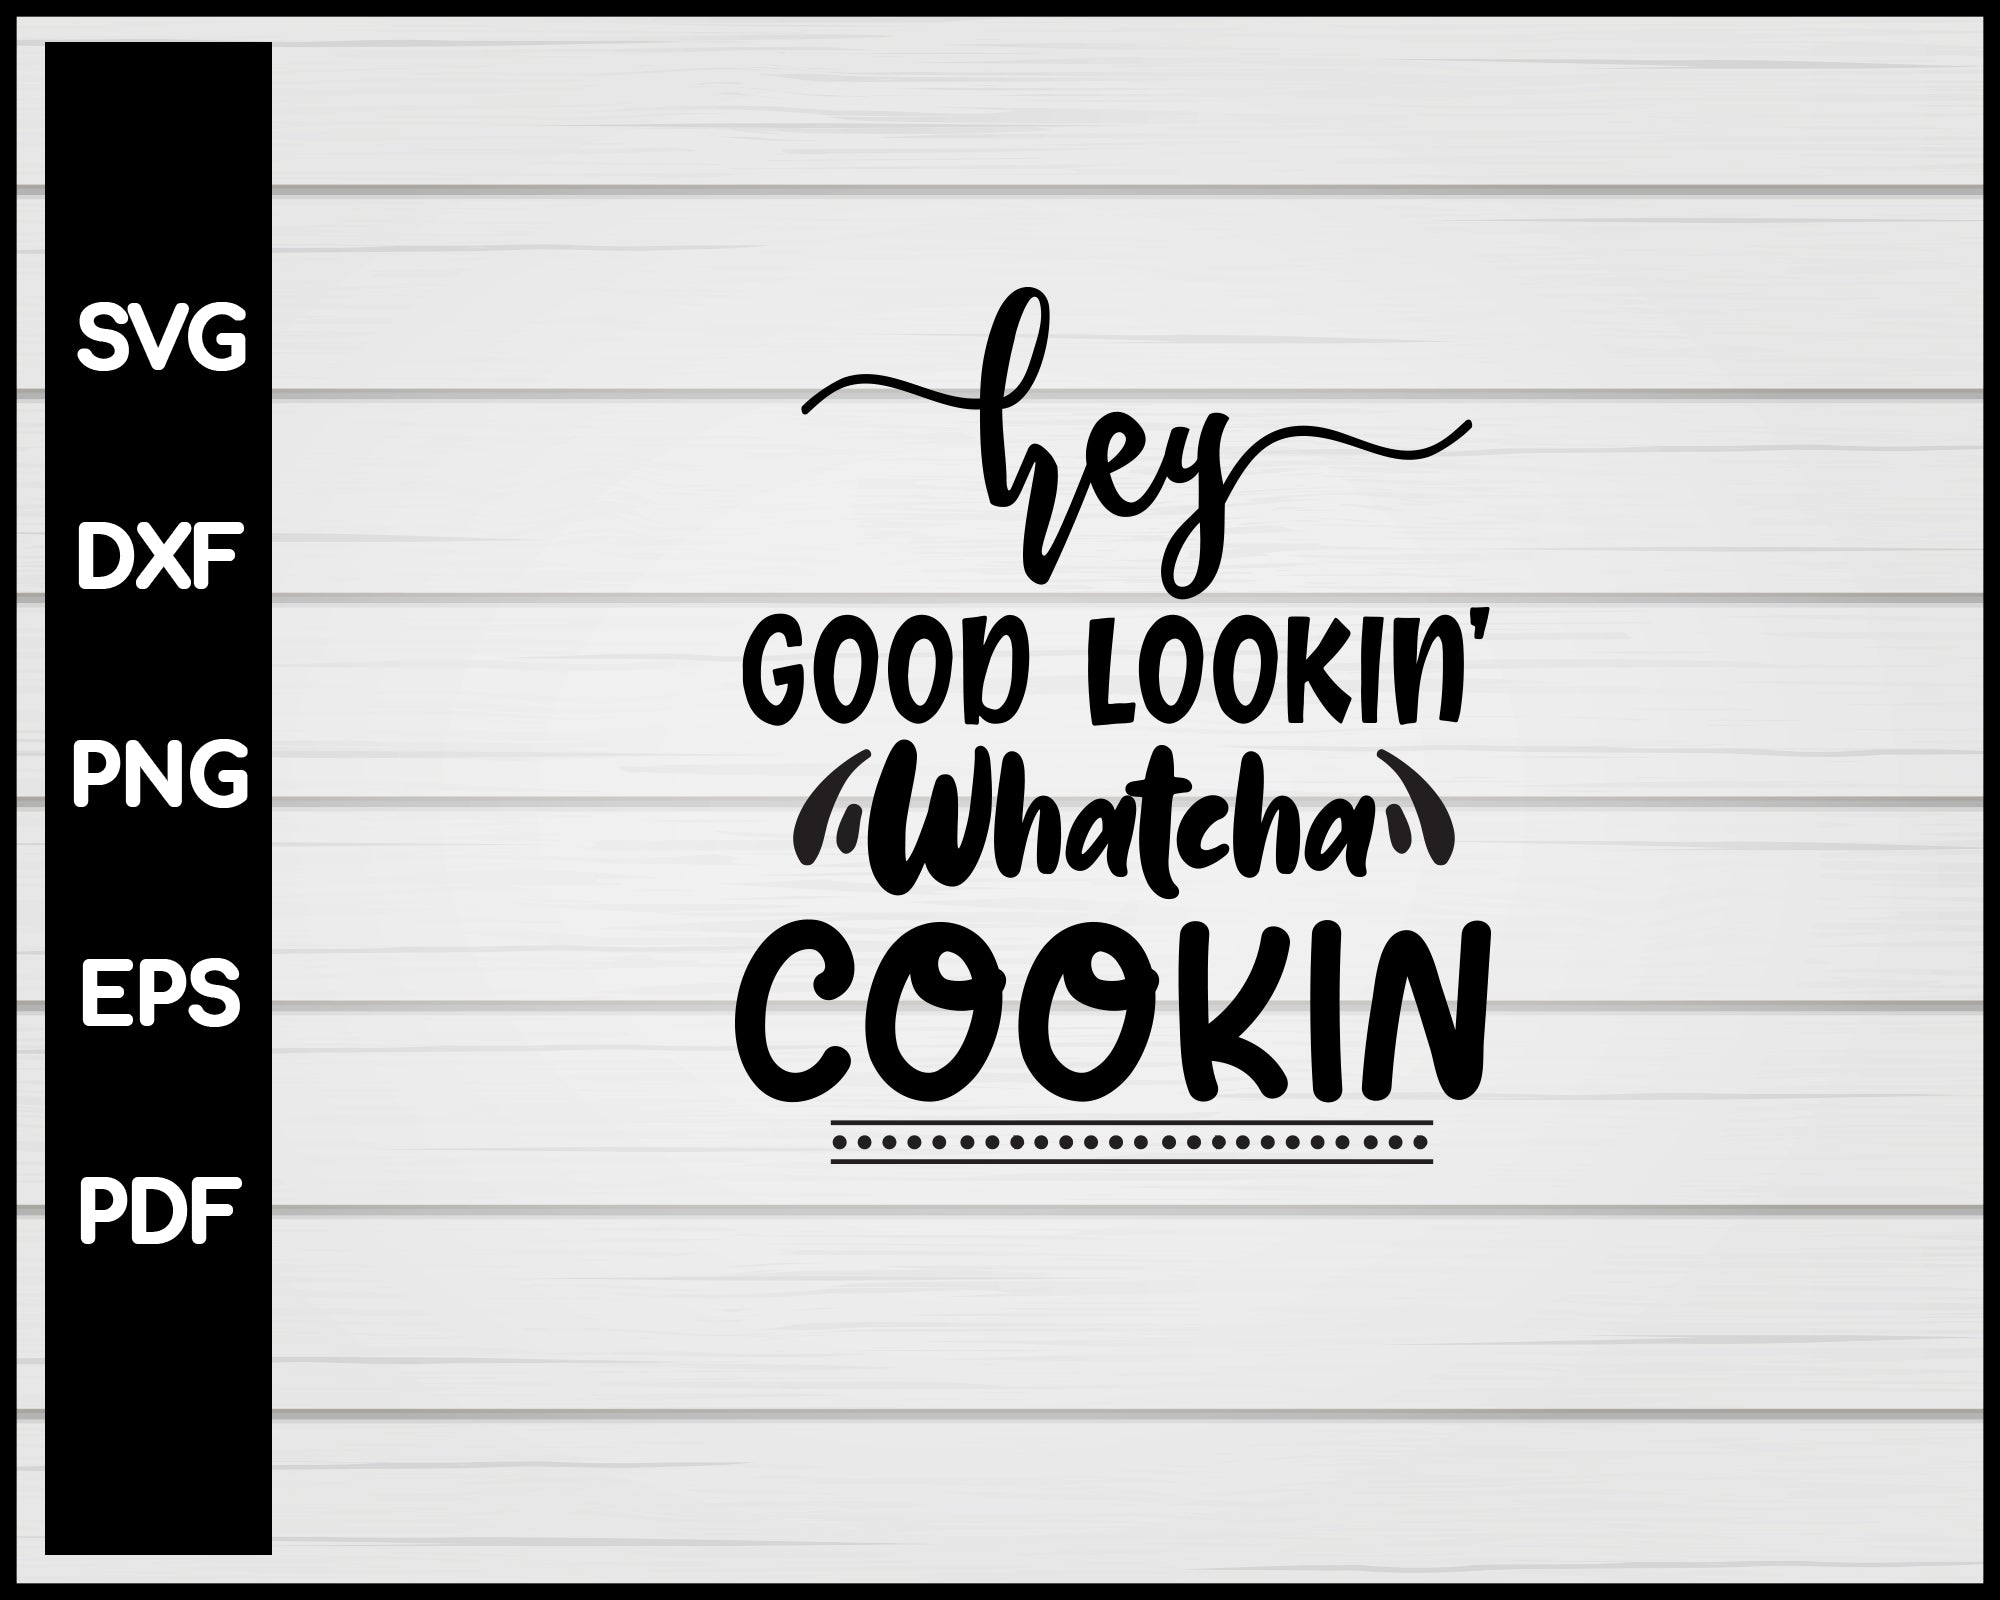 Hey Good Looking' Whatcha Got Cookin svg Cut File For Cricut Silhouette eps png dxf Printable Files